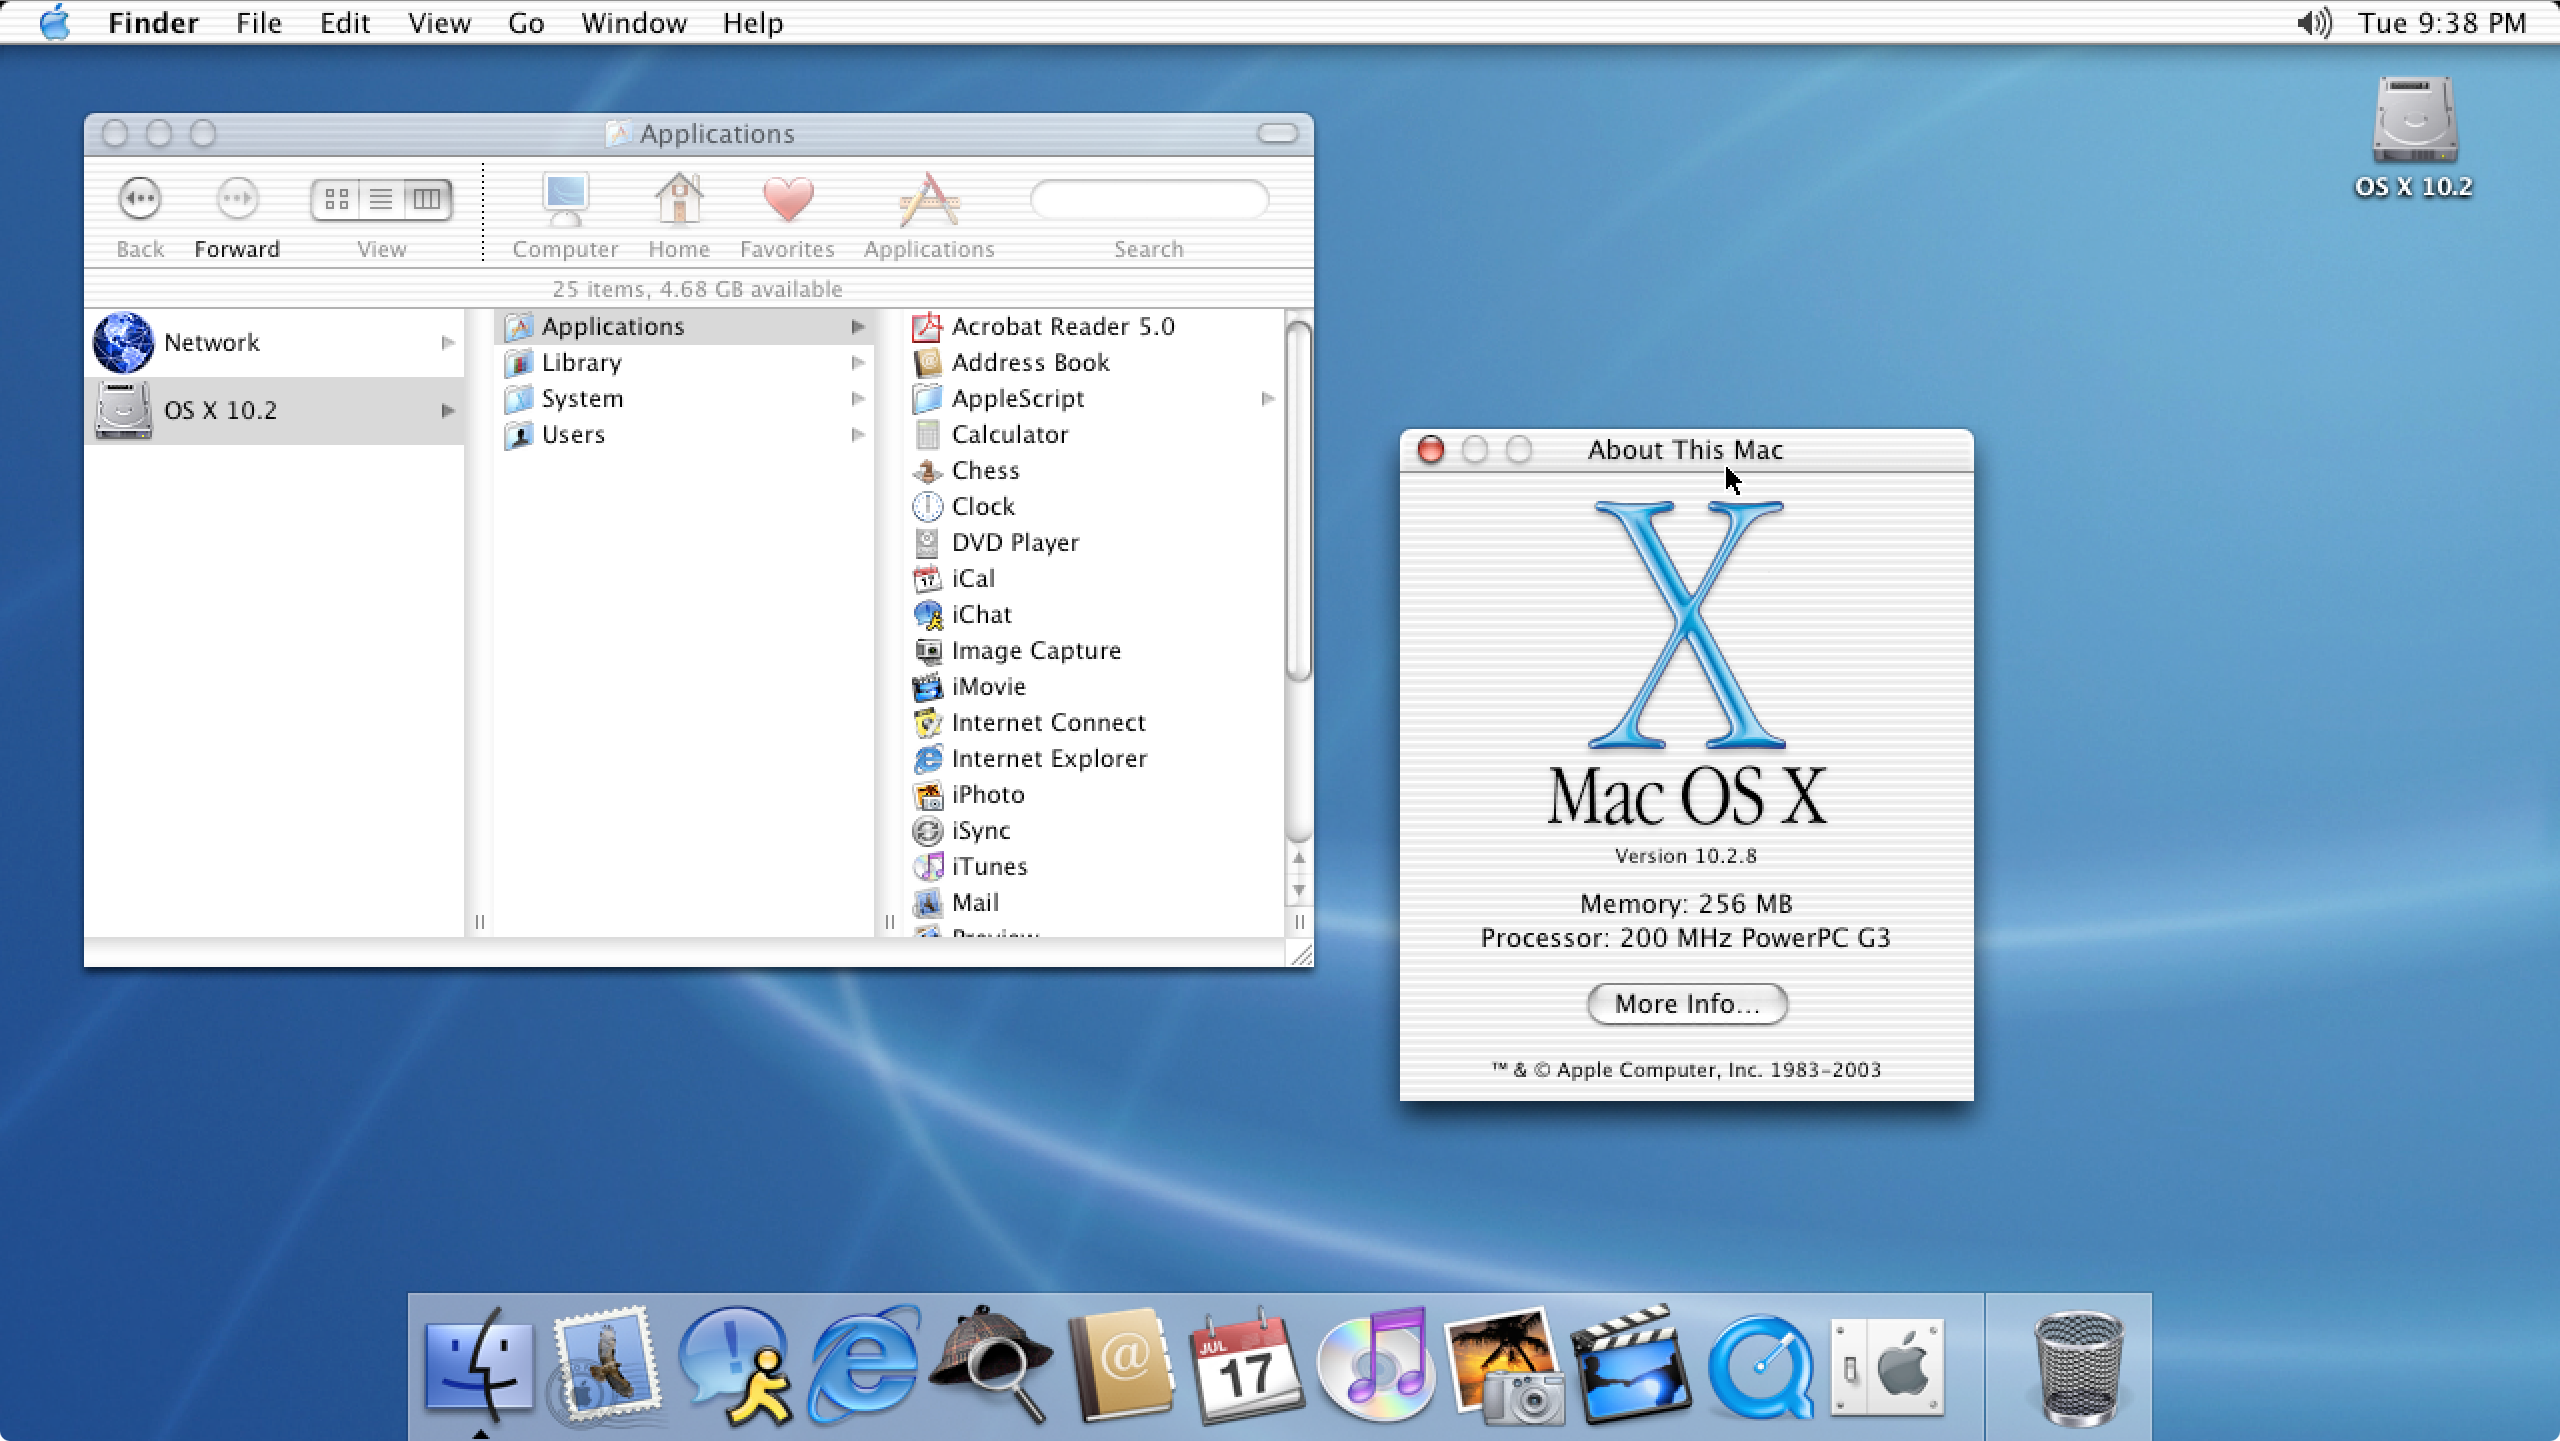 Latest Version Of Itunes For Mac Os X 10.5 8